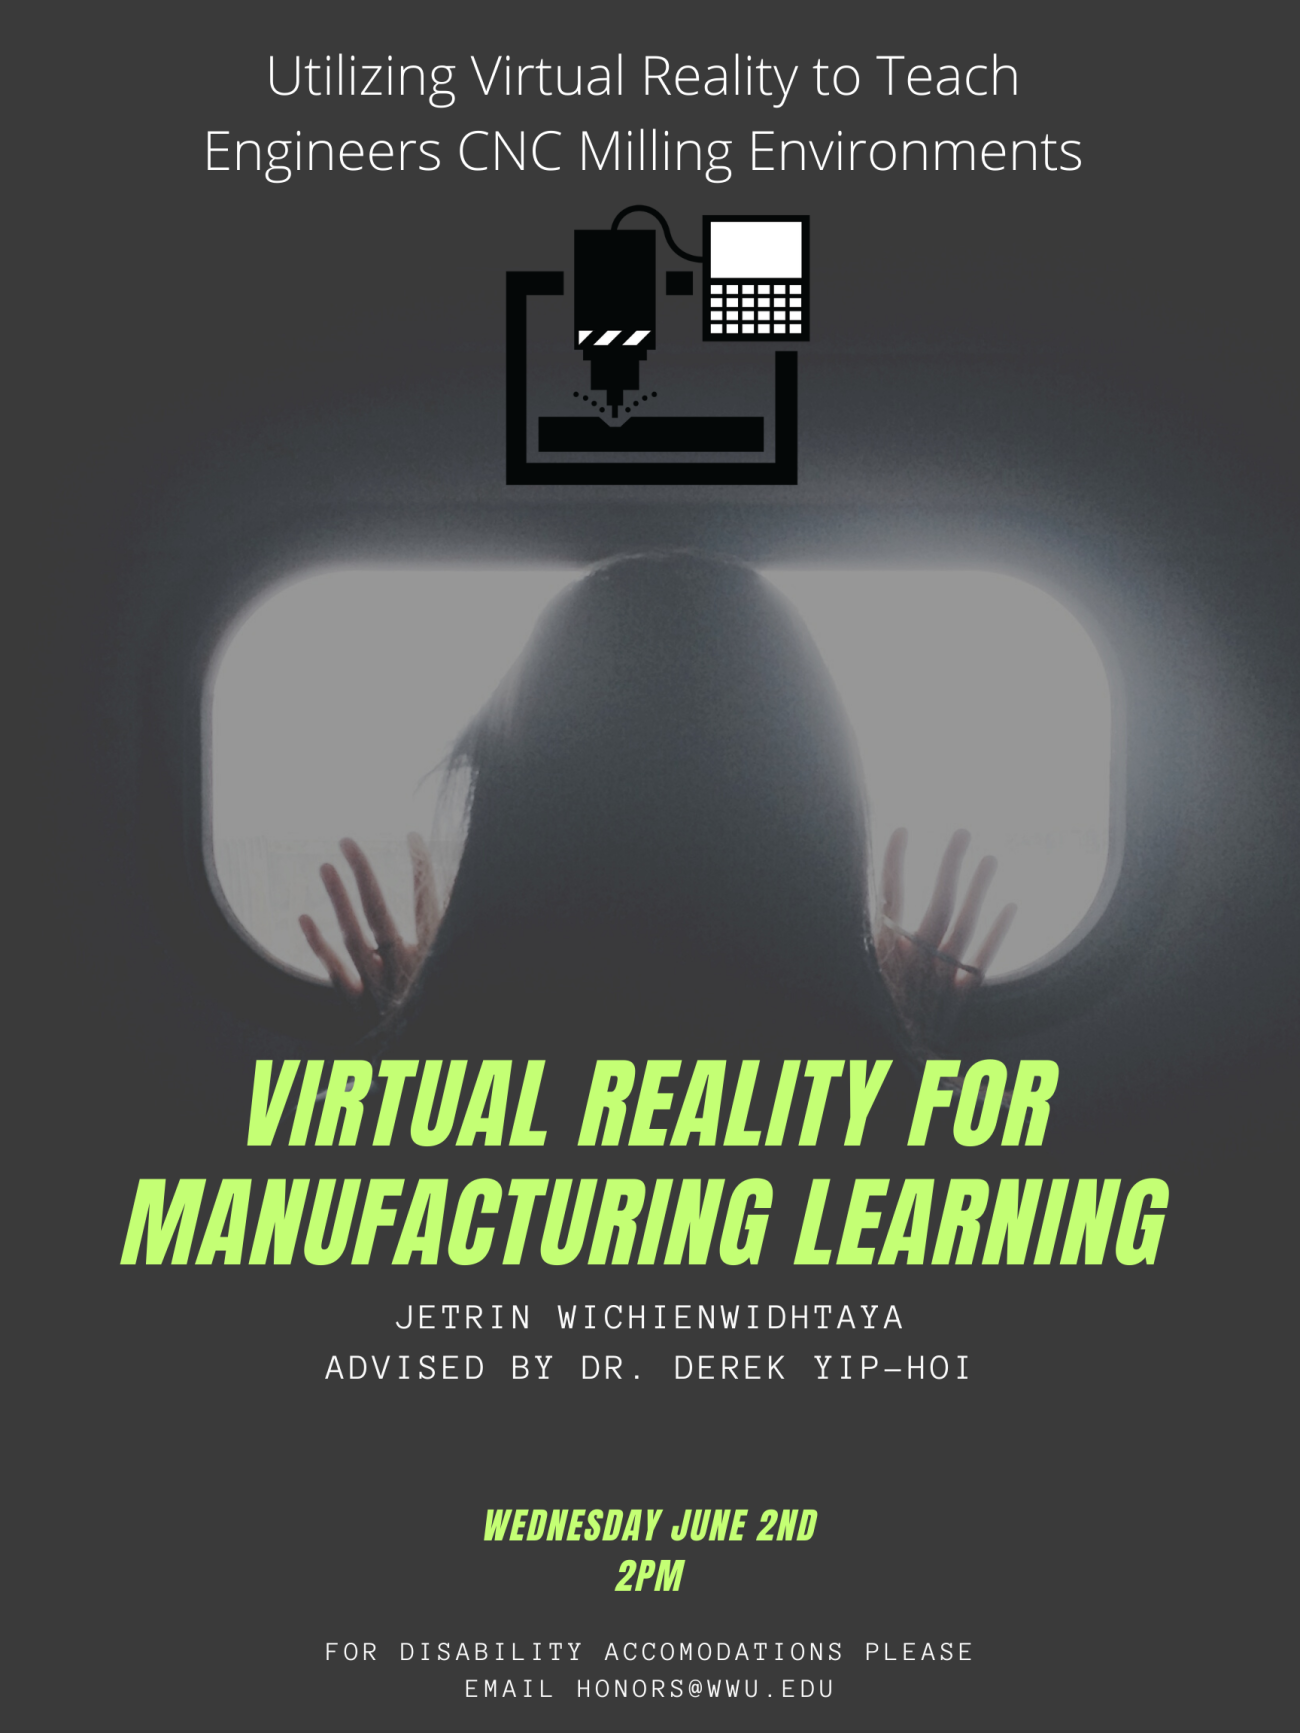 Photo of person's head and hands facing away from the viewer, back lit by a bright rectangular screen. Over the photo, in green and white text, poster reads: "Virtual Reality for Manufacturing Learning: Utilizing Virtual Reality to Teach Engineers CNC Milling Environments. Jetrin Wichienwidhtaya, Advised by: Dr. Derek Yip-Hoi. Wednesday June 2nd, 2 PM. For disability accommodations please email honors@wwu.edu".